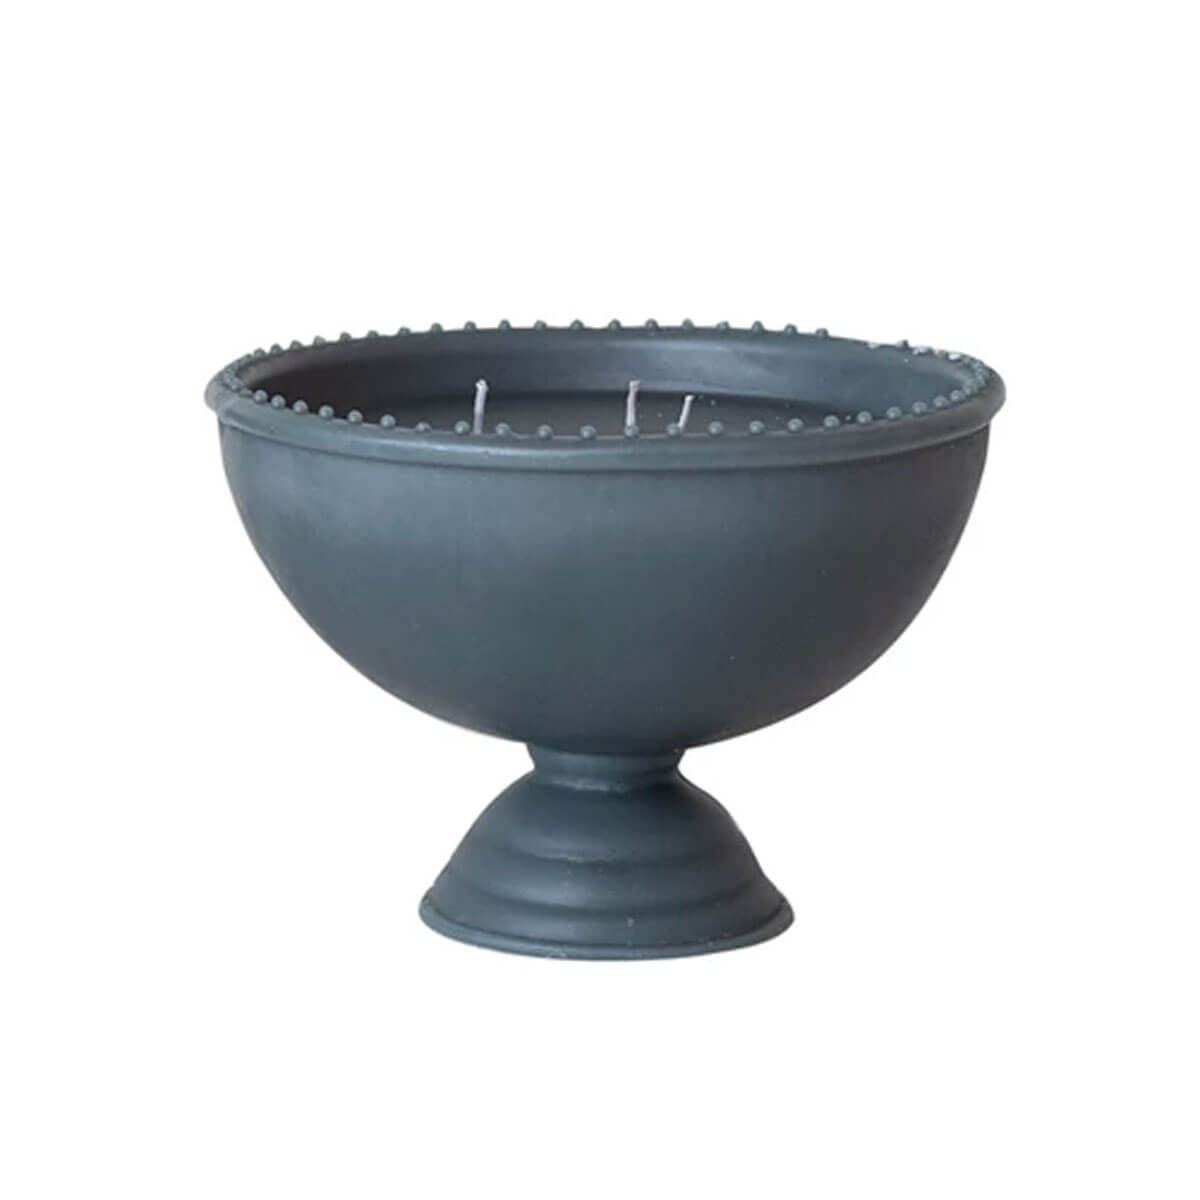 Unscented Hobnail Edged Footed Bowl Shaped Candle teal front | MILK MONEY milkmoney.co | soy wax candles, small candles. natural candles, organic candles, scented soy candles, concrete candle, hand poured candles, hand poured soy candles, cement candle, hand poured soy wax candles, scented hand poured candles, hand poured scented candles